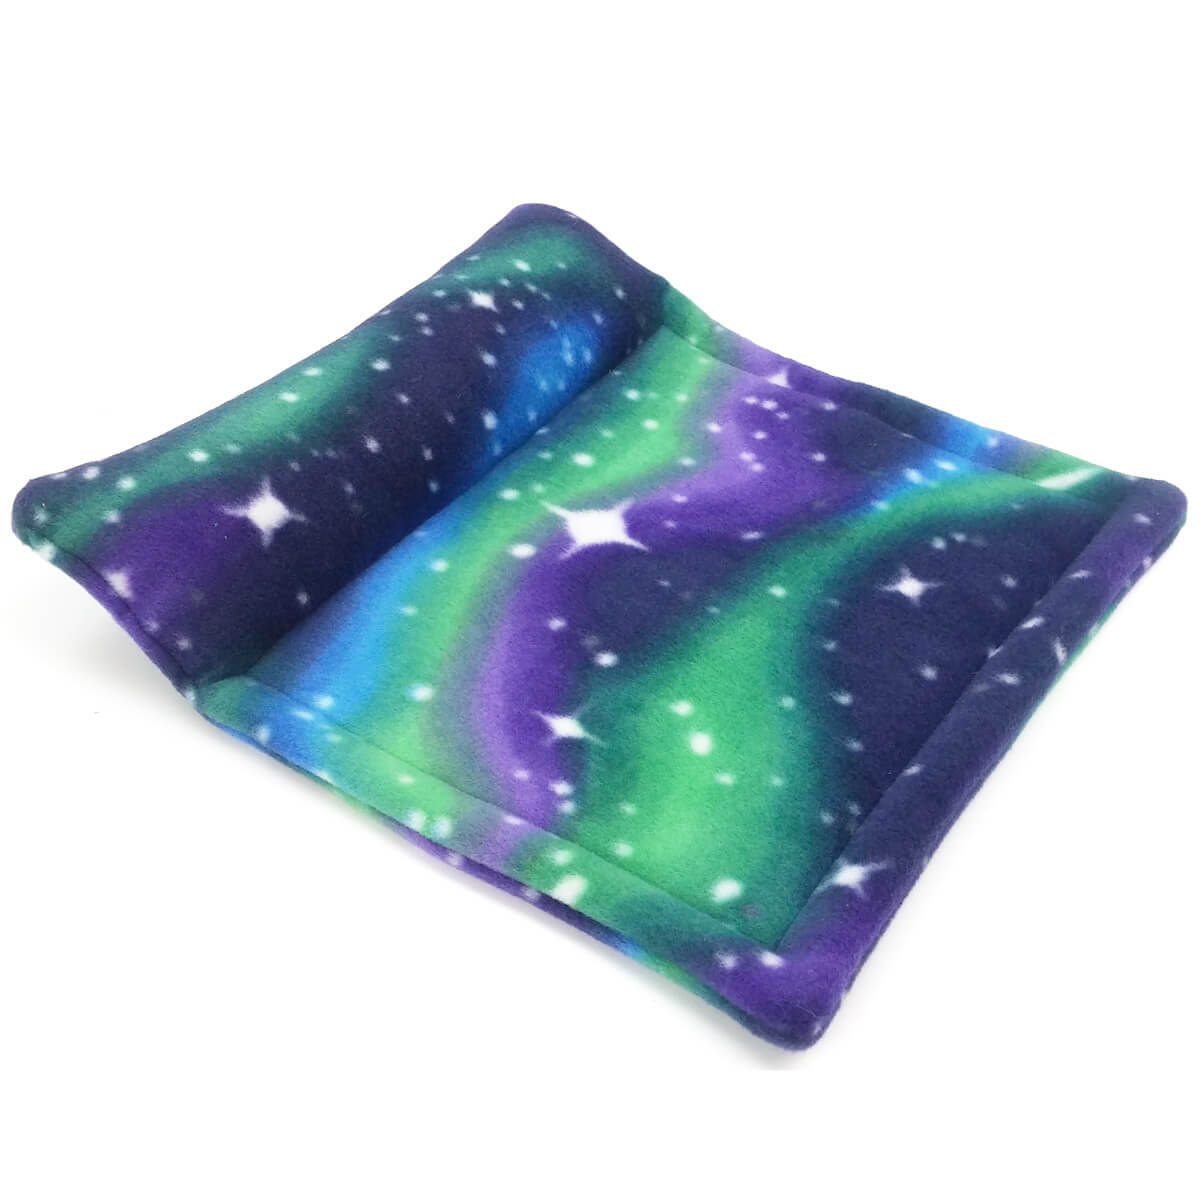 Pillow Pad in Northern Lights